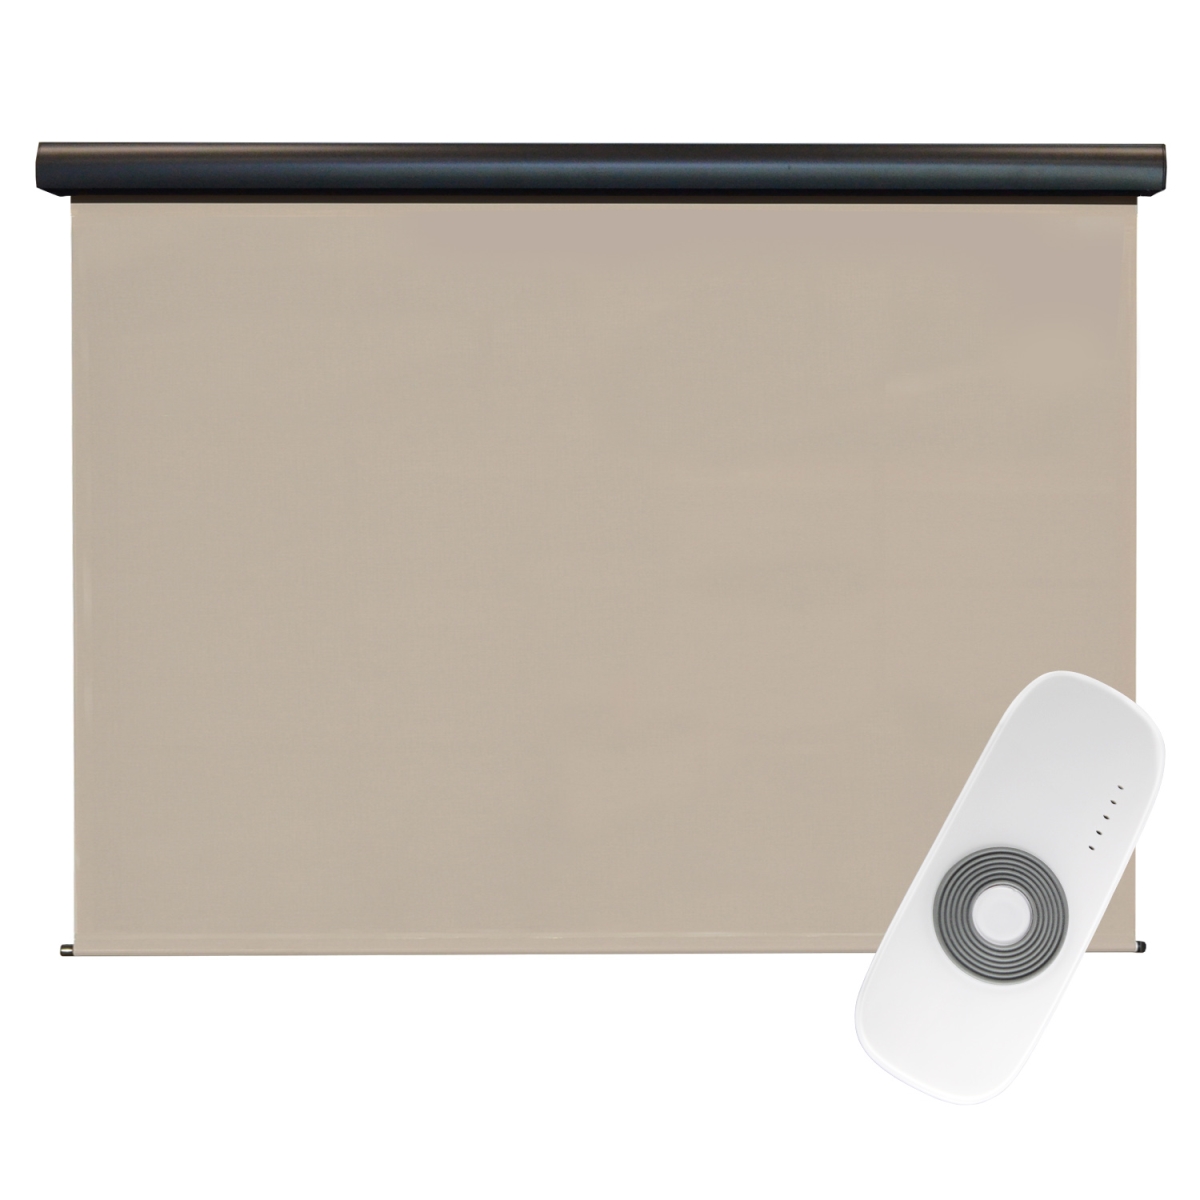 O80.68.80 6 X 8 Ft. Regal Rechargeable Motorized Outdoor Sun Shade With Protective Valance - Maple White